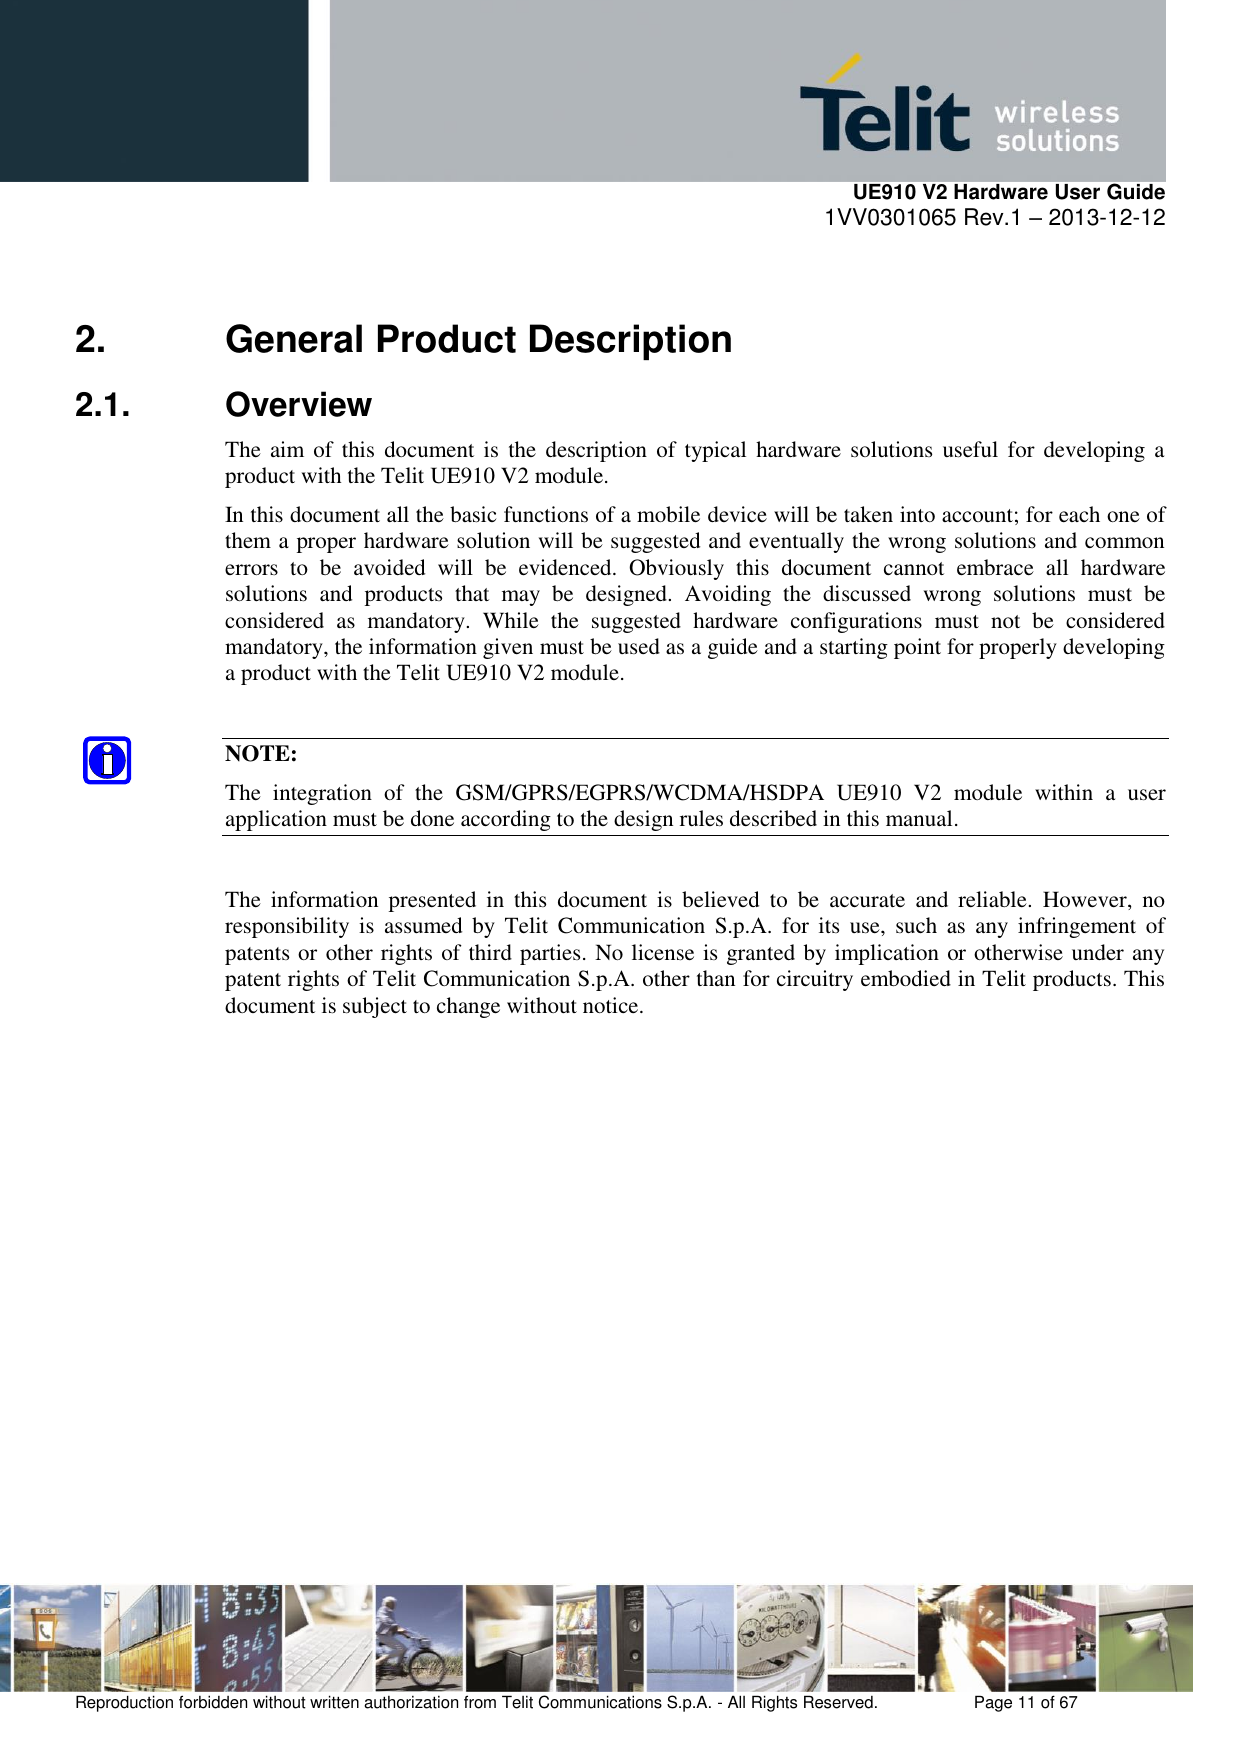     UE910 V2 Hardware User Guide 1VV0301065 Rev.1 – 2013-12-12  Reproduction forbidden without written authorization from Telit Communications S.p.A. - All Rights Reserved.    Page 11 of 67                                                     2.  General Product Description 2.1.  Overview The aim  of  this  document  is  the  description of typical  hardware solutions  useful for  developing  a product with the Telit UE910 V2 module. In this document all the basic functions of a mobile device will be taken into account; for each one of them a proper hardware solution will be suggested and eventually the wrong solutions and common errors  to  be  avoided  will  be  evidenced.  Obviously  this  document  cannot  embrace  all  hardware solutions  and  products  that  may  be  designed.  Avoiding  the  discussed  wrong  solutions  must  be considered  as  mandatory.  While  the  suggested  hardware  configurations  must  not  be  considered mandatory, the information given must be used as a guide and a starting point for properly developing a product with the Telit UE910 V2 module.  NOTE: The  integration  of  the  GSM/GPRS/EGPRS/WCDMA/HSDPA  UE910  V2  module  within  a  user application must be done according to the design rules described in this manual.  The  information  presented  in  this  document  is  believed  to  be  accurate  and  reliable.  However,  no responsibility  is  assumed  by  Telit  Communication  S.p.A. for  its  use,  such  as  any  infringement  of patents or other rights of third parties. No license is granted by implication or otherwise under any patent rights of Telit Communication S.p.A. other than for circuitry embodied in Telit products. This document is subject to change without notice.            